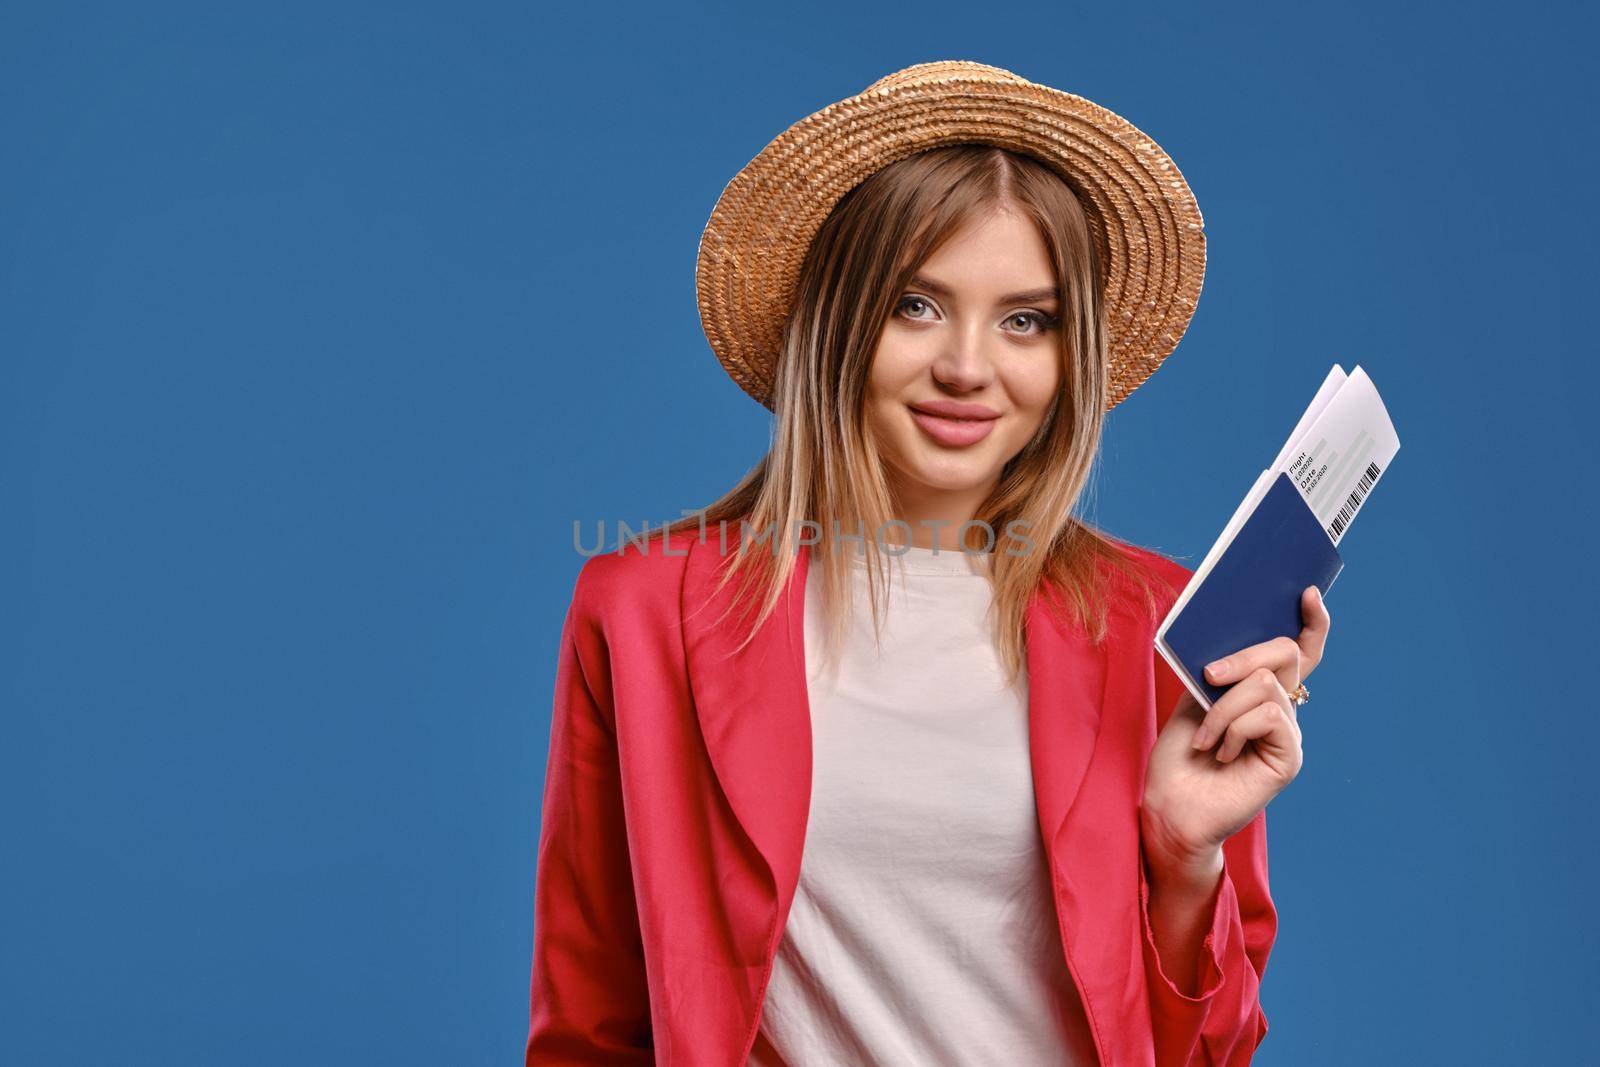 Pretty, blonde girl in straw hat, white blouse and red pantsuit. She is smiling, showing her passport and ticket, posing against blue studio background. Travelling concept. Close-up, copy space